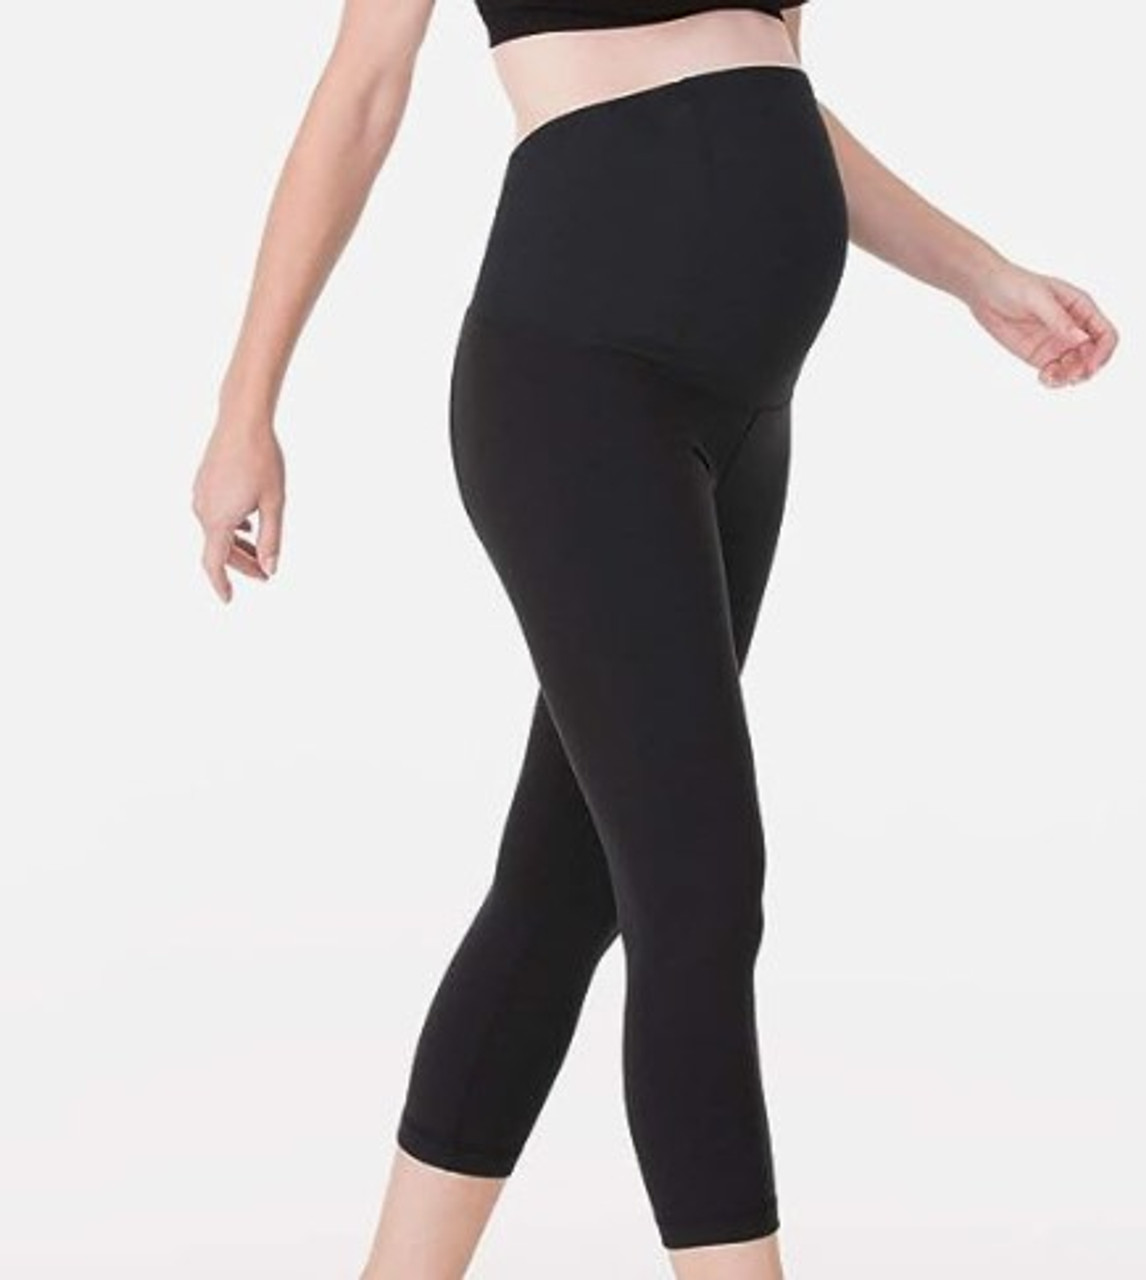 https://cdn11.bigcommerce.com/s-r23r6d/images/stencil/1280x1280/products/12393/24849/Ingrid-Isabel-Maternity-Black_Capri_Legging-Crossover-_Gently_Used_Condition__39055.1690488109.jpg?c=2?imbypass=on